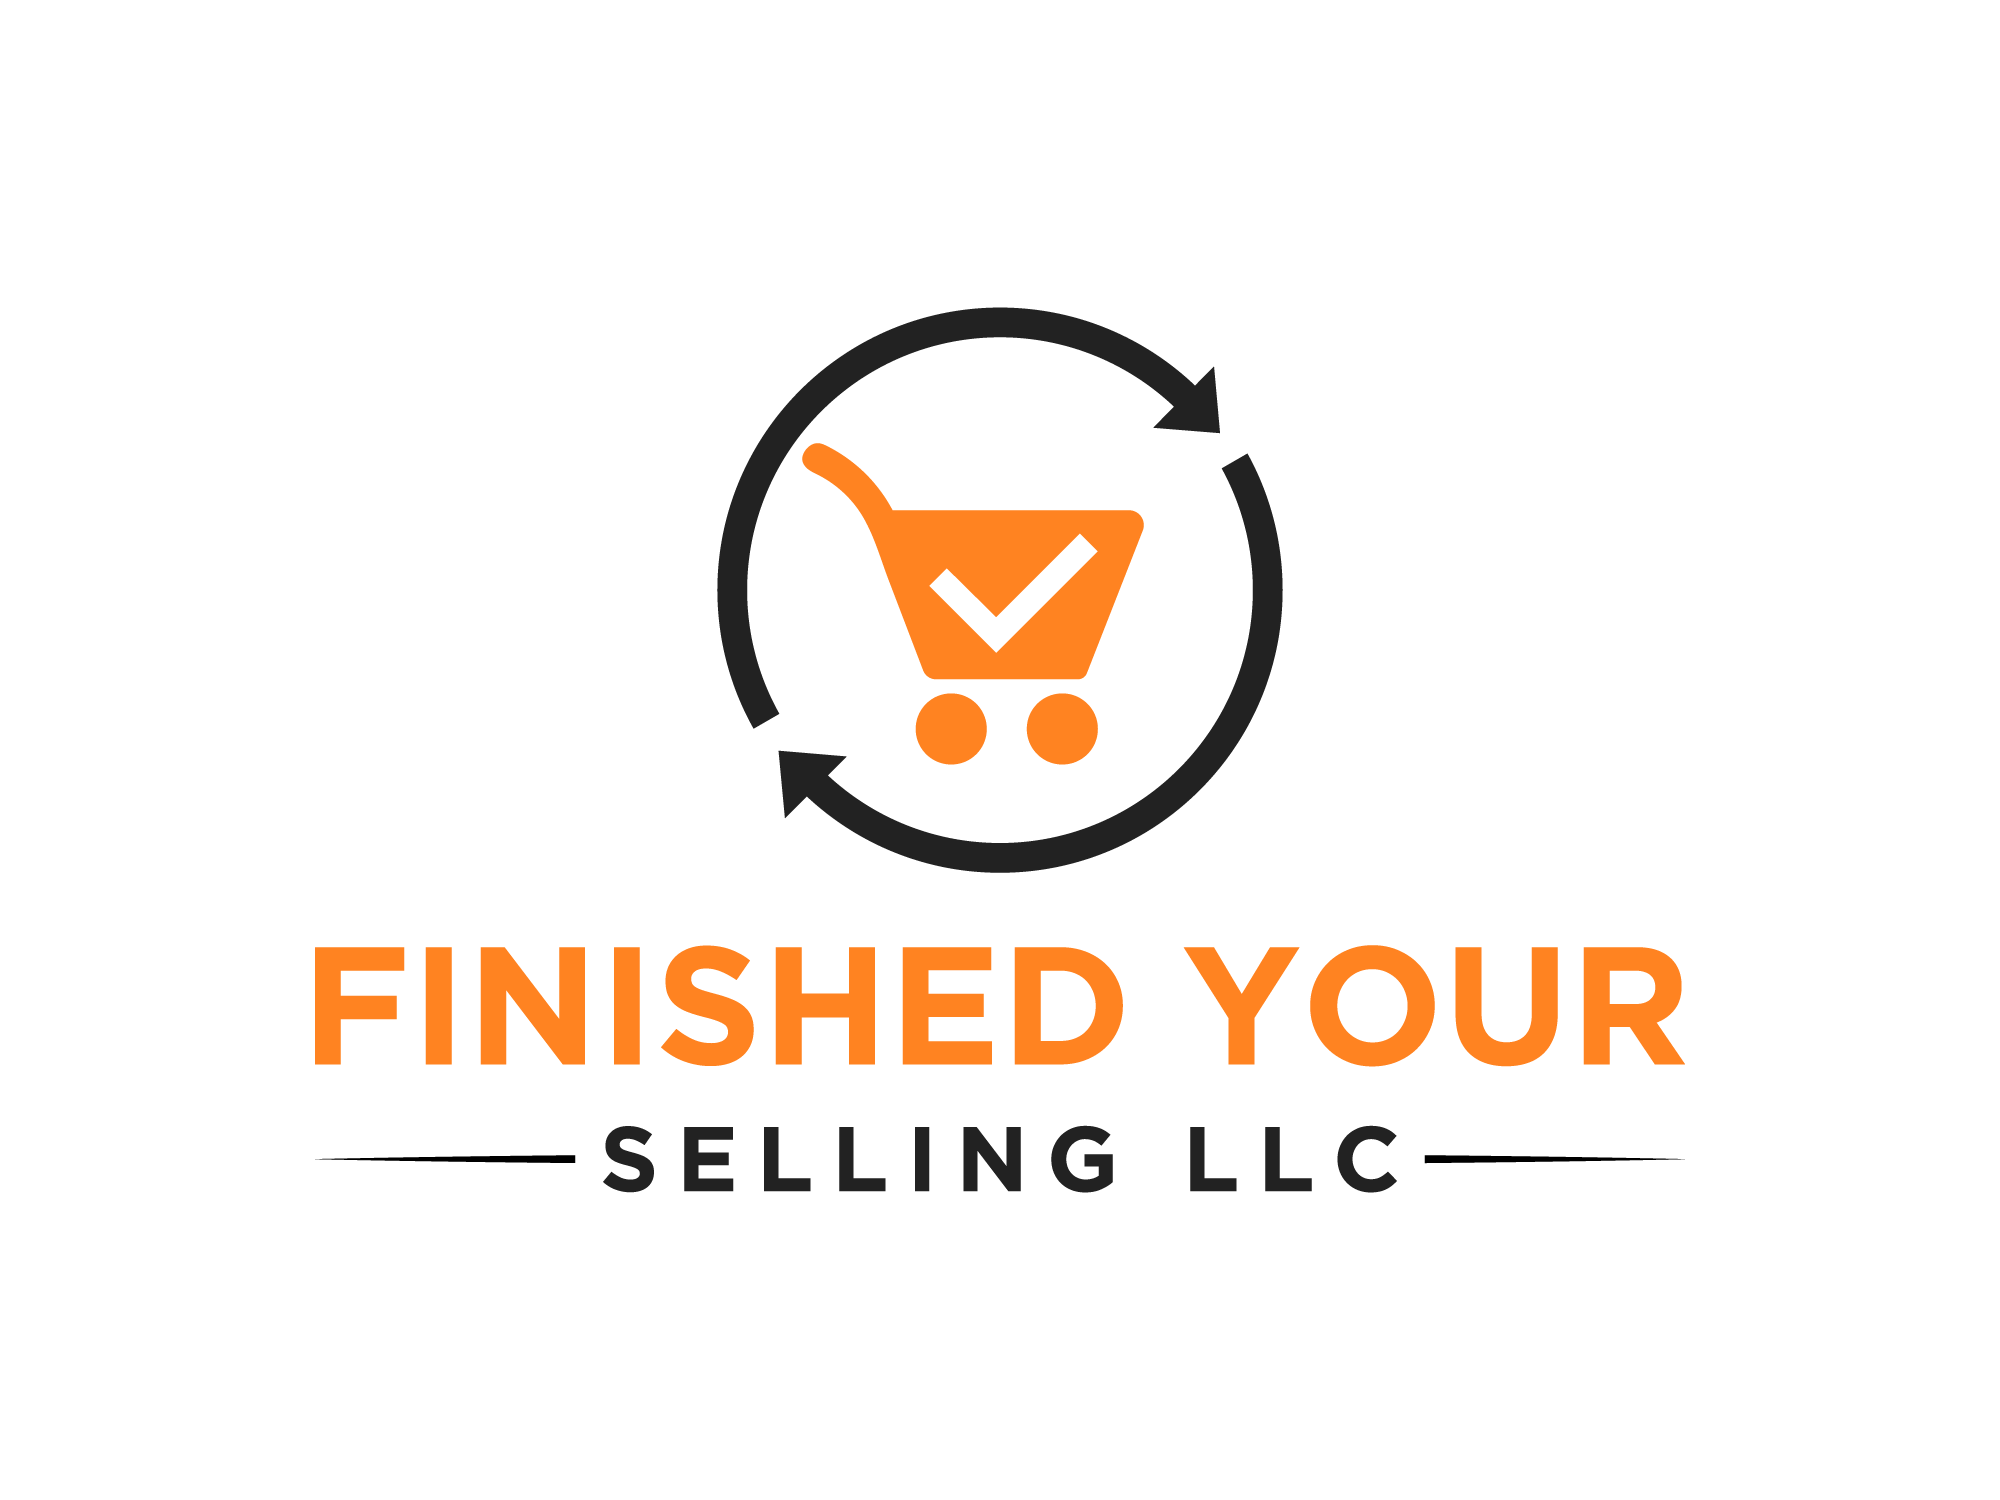 Finished Your Selling LLC